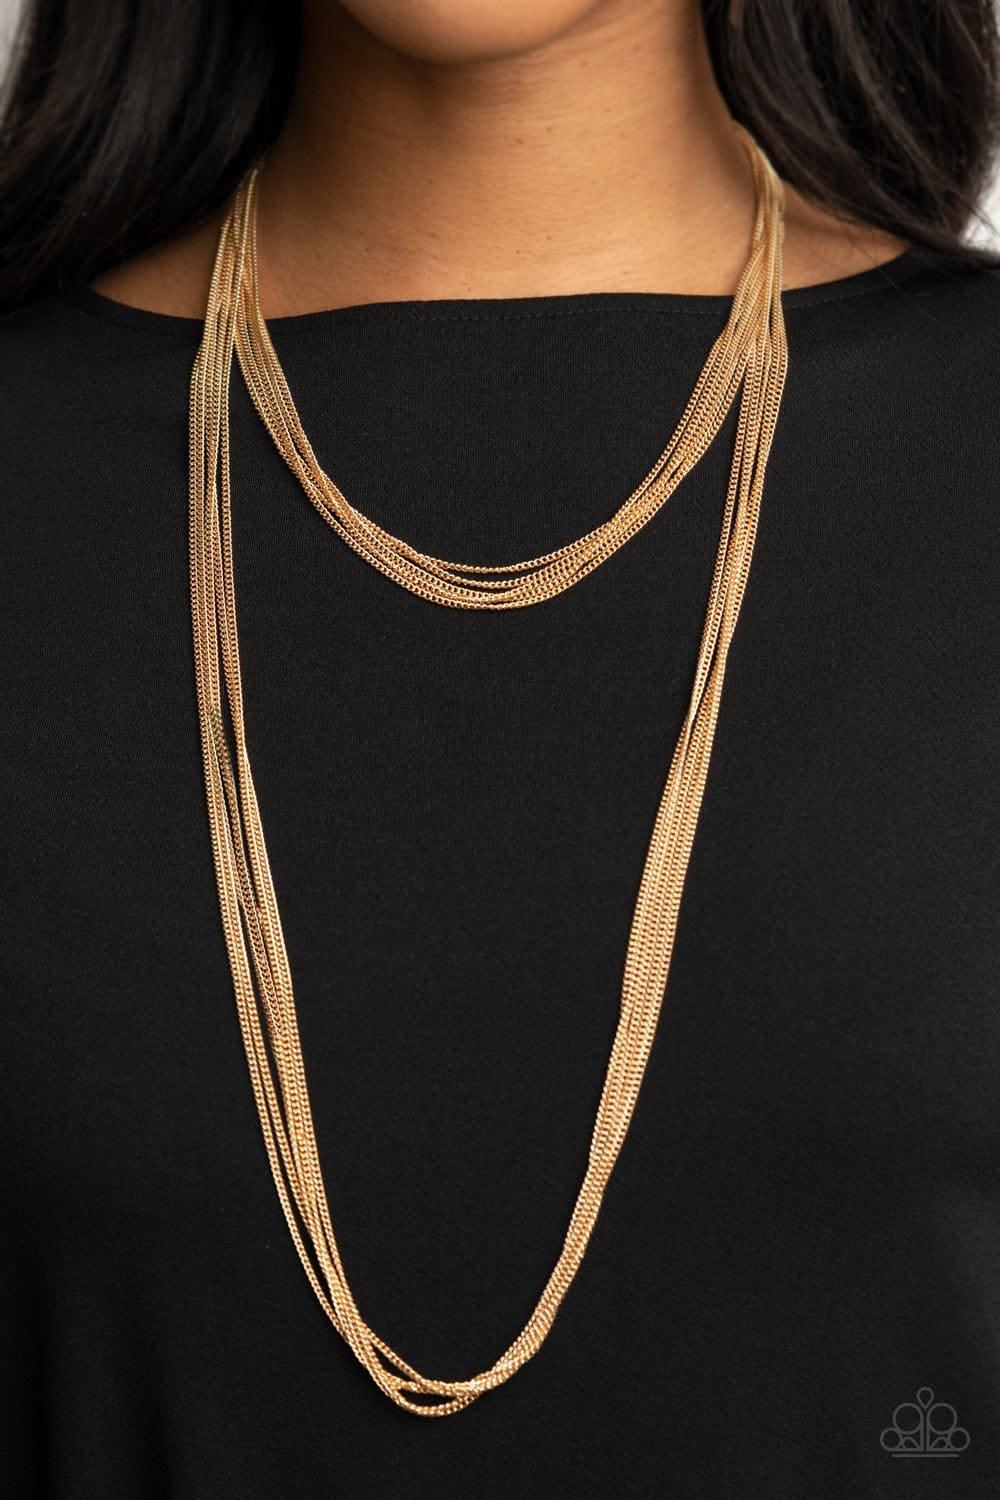 Paparazzi Accessories - Save Your Tiers - Gold Necklace - Bling by JessieK